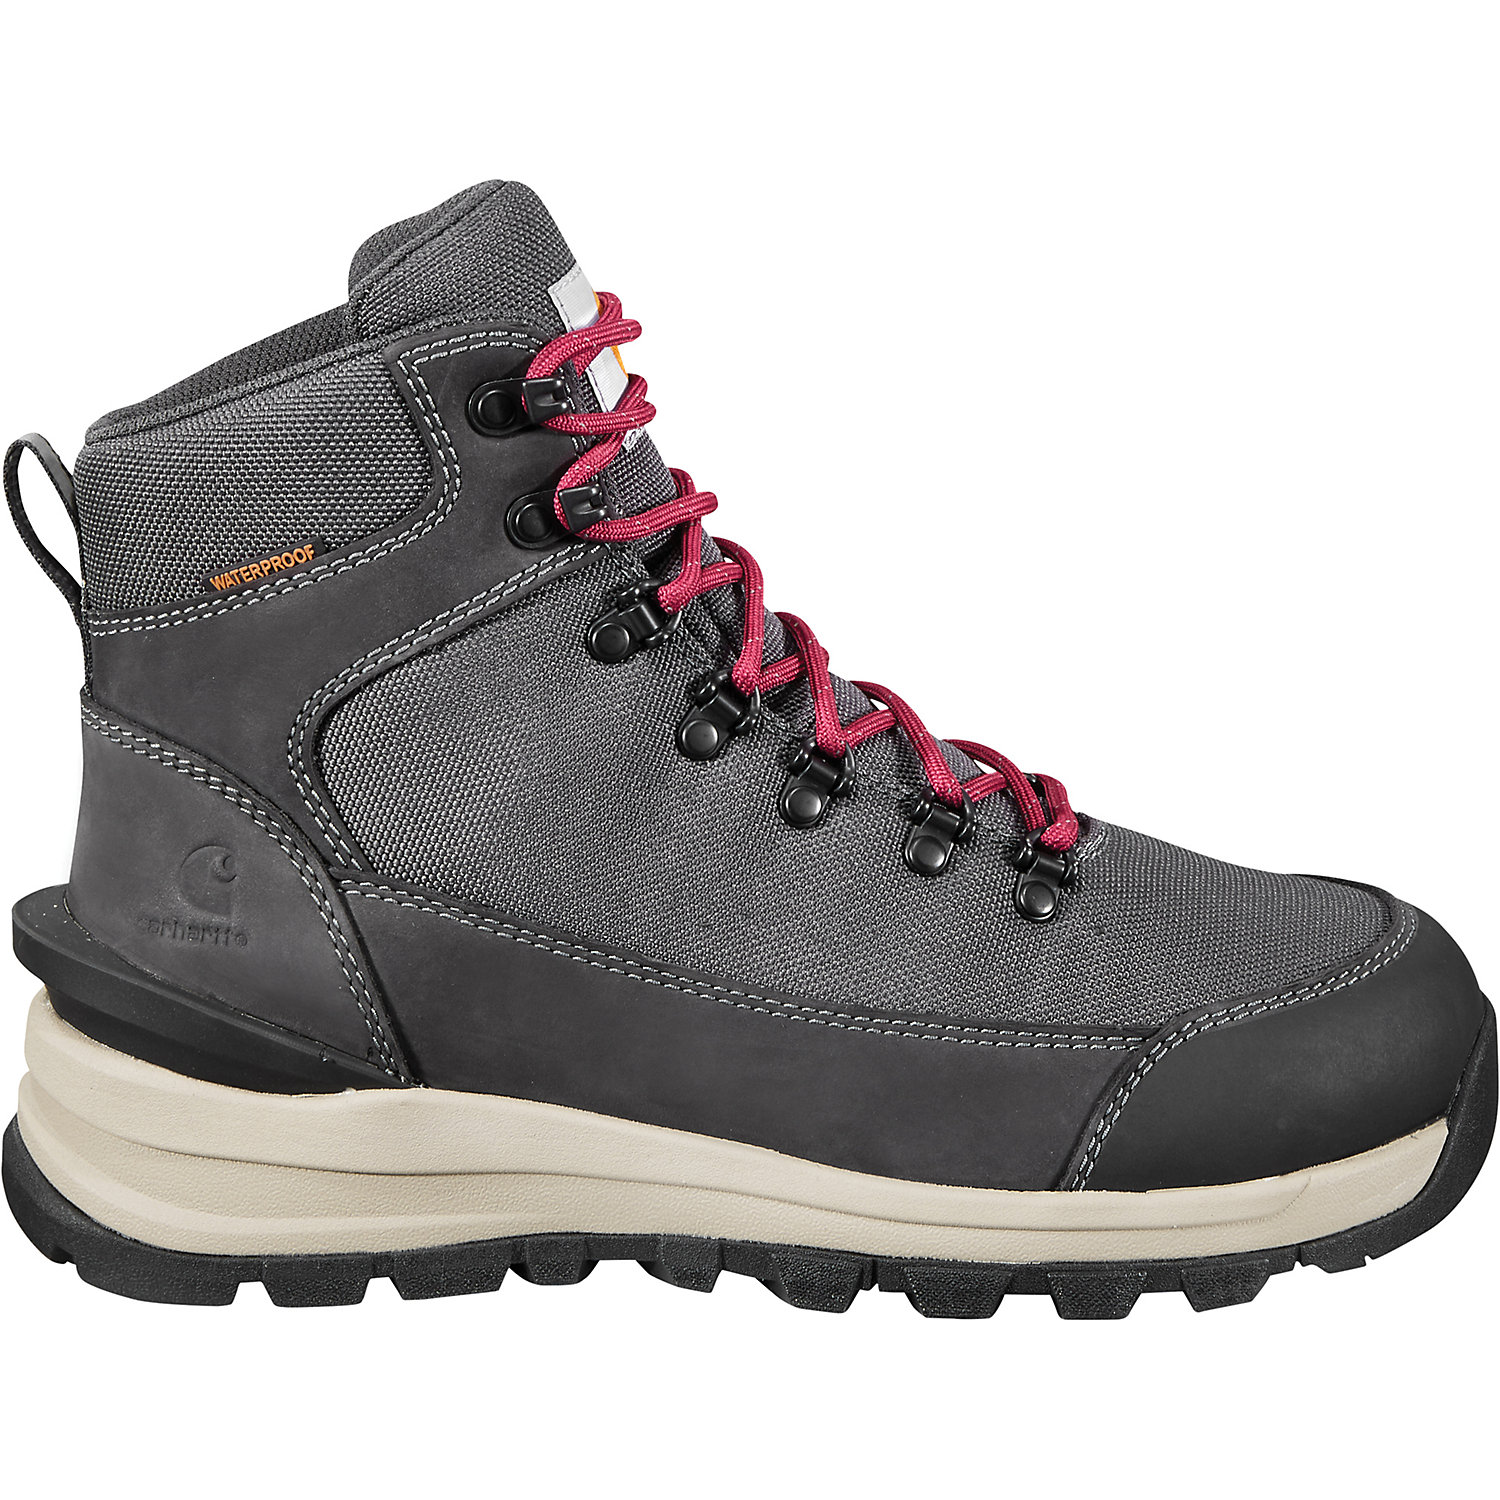 Carhartt Womens Gilmore Waterproof 6 Inch Work Hiker Boot - Alloy Safety Toe